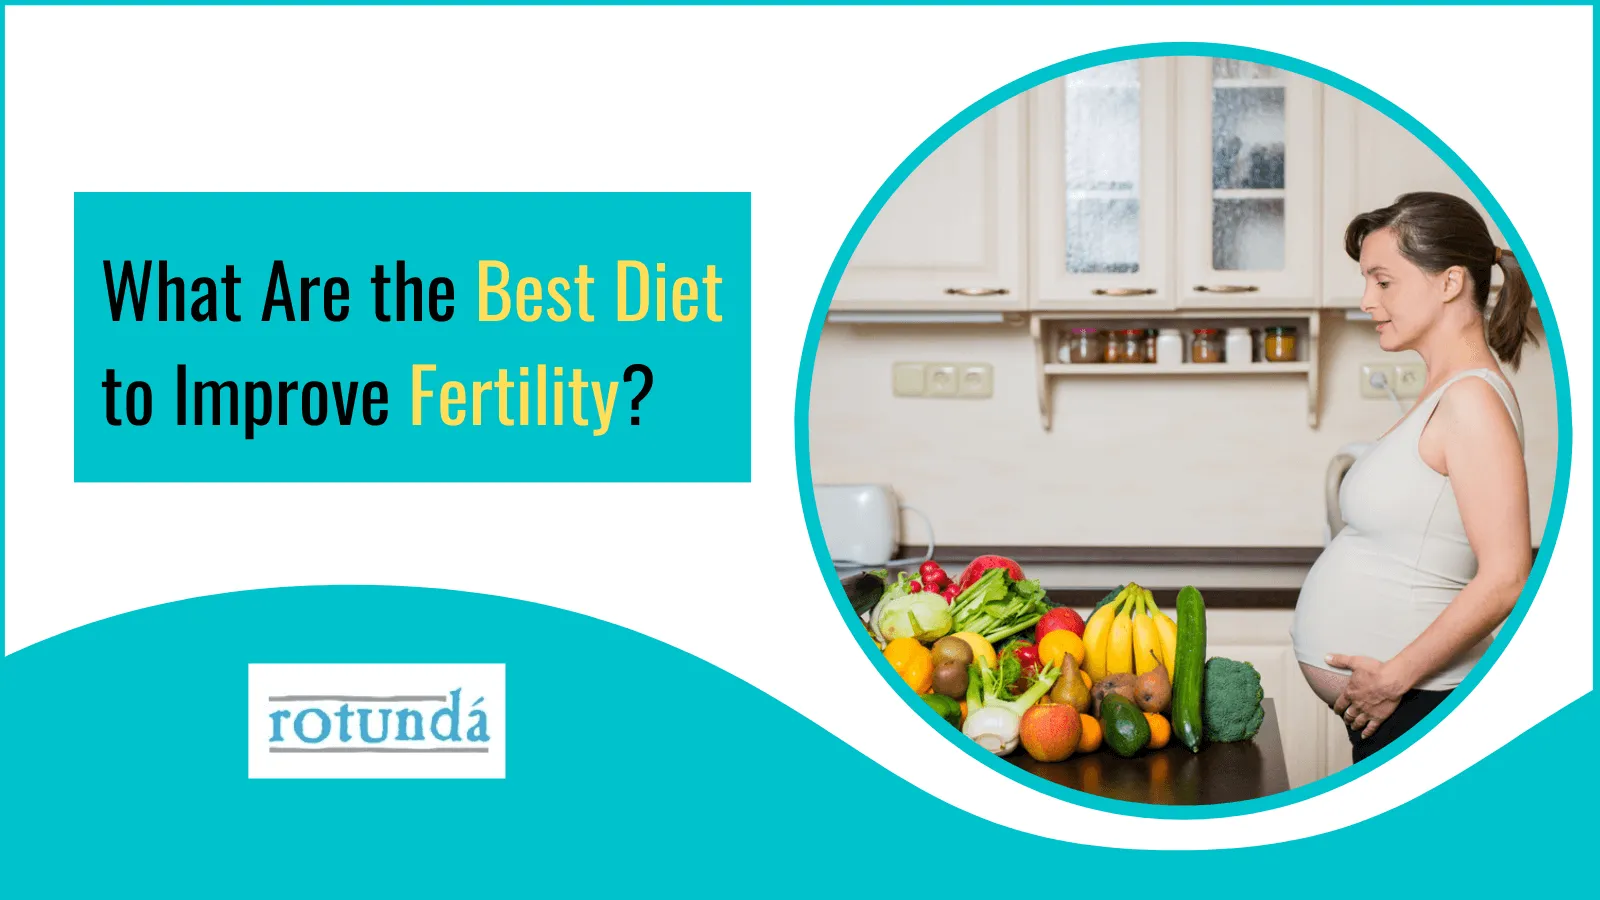 What Are the Best Diet to Improve Fertility?